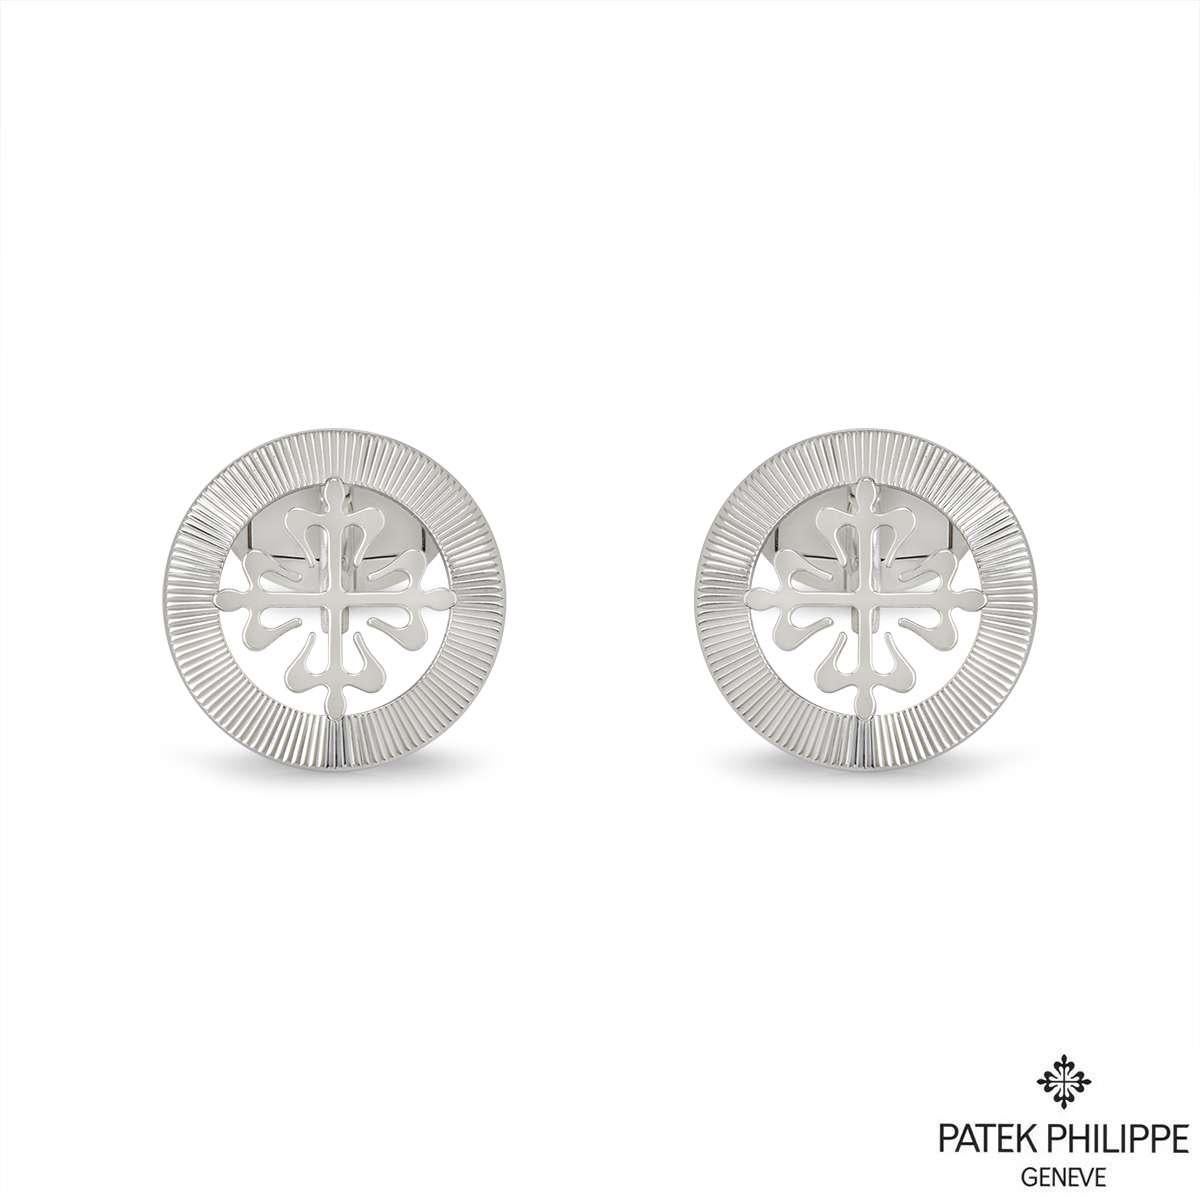 A pair of 18k white gold Calatrava cufflinks by Patek Philippe. The cufflinks feature the classic Calatrava cross motif, surrounded with a guilloche outer edge boarder. The cufflinks have whale back fittings and the motif measures 18mm in diameter.